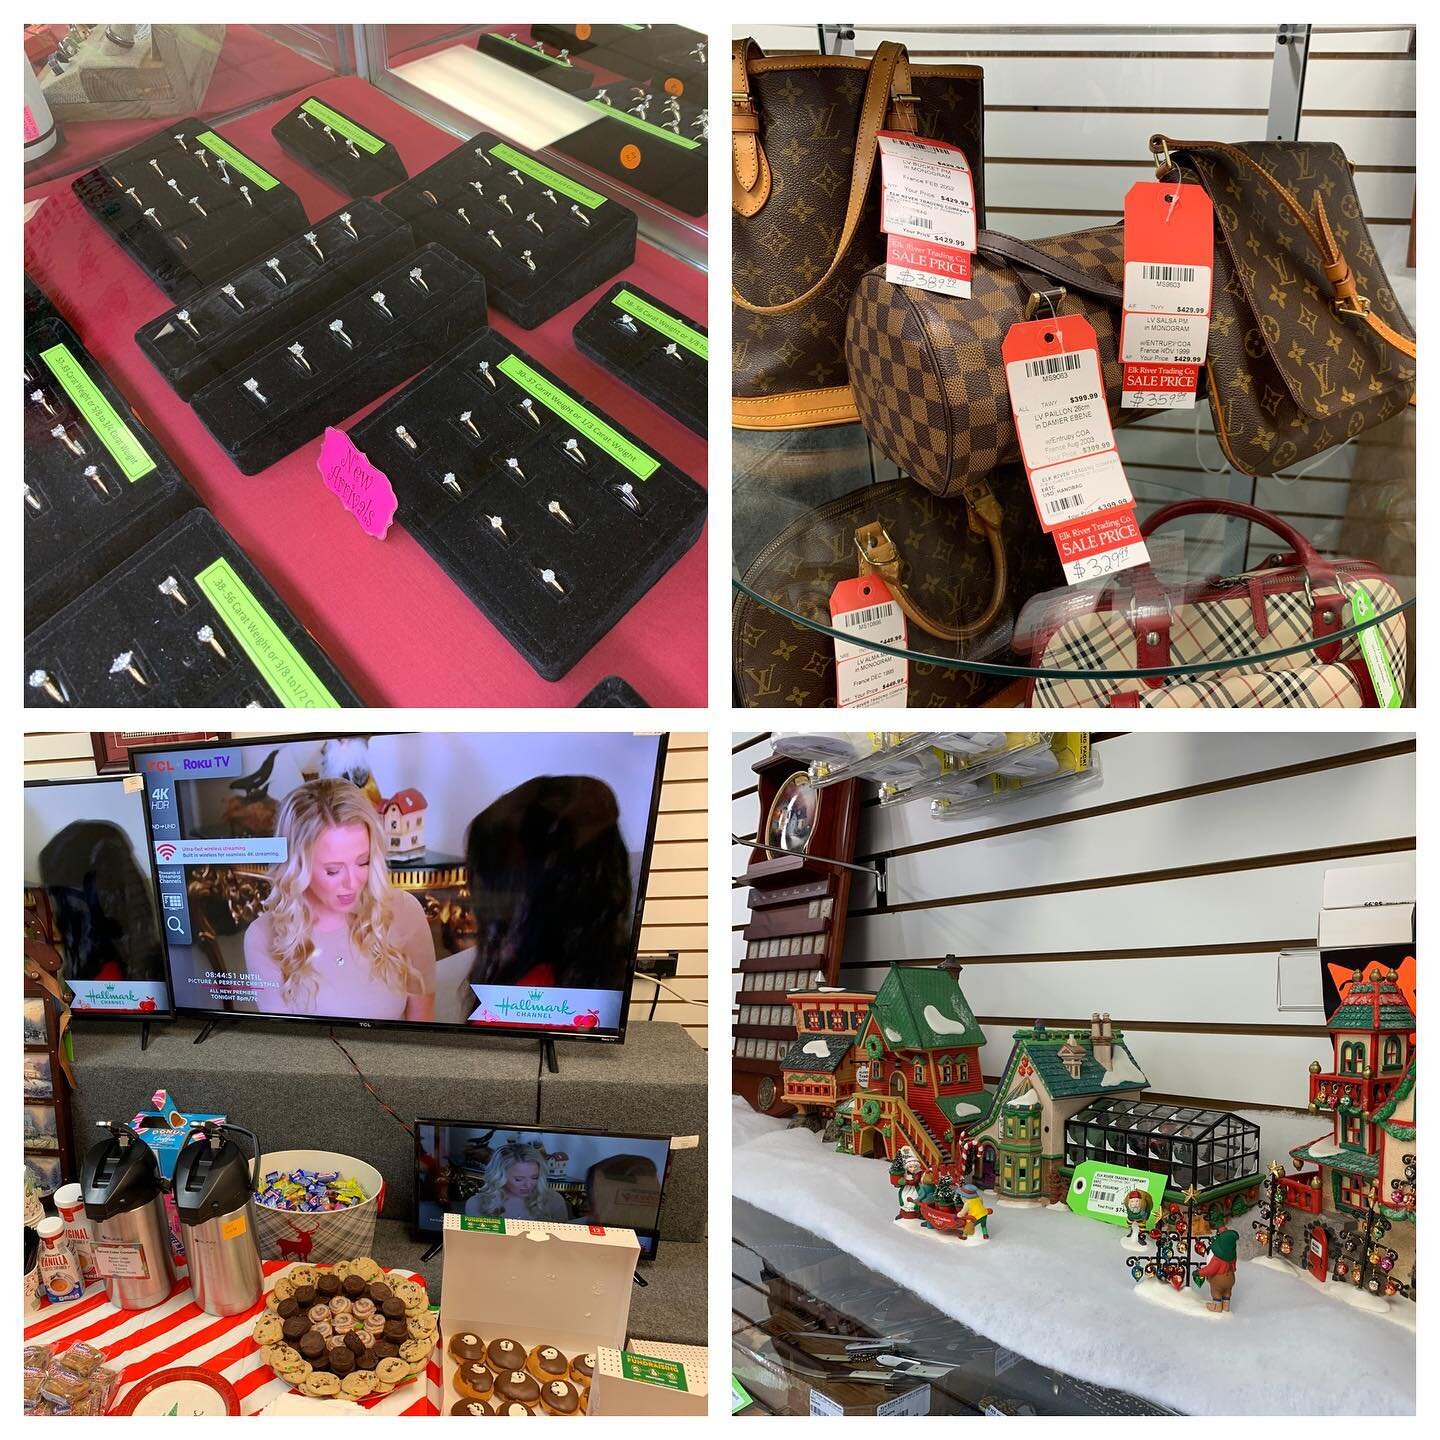 We have hot cider and HOT DEALS today at Fayetteville Couture, located at Elk River Trading Company.  Free cider, coffee &amp; Donuts till 4. Visit our spacious clean store and restrooms. We have even switched all of the TVs to the Hallmark channel f